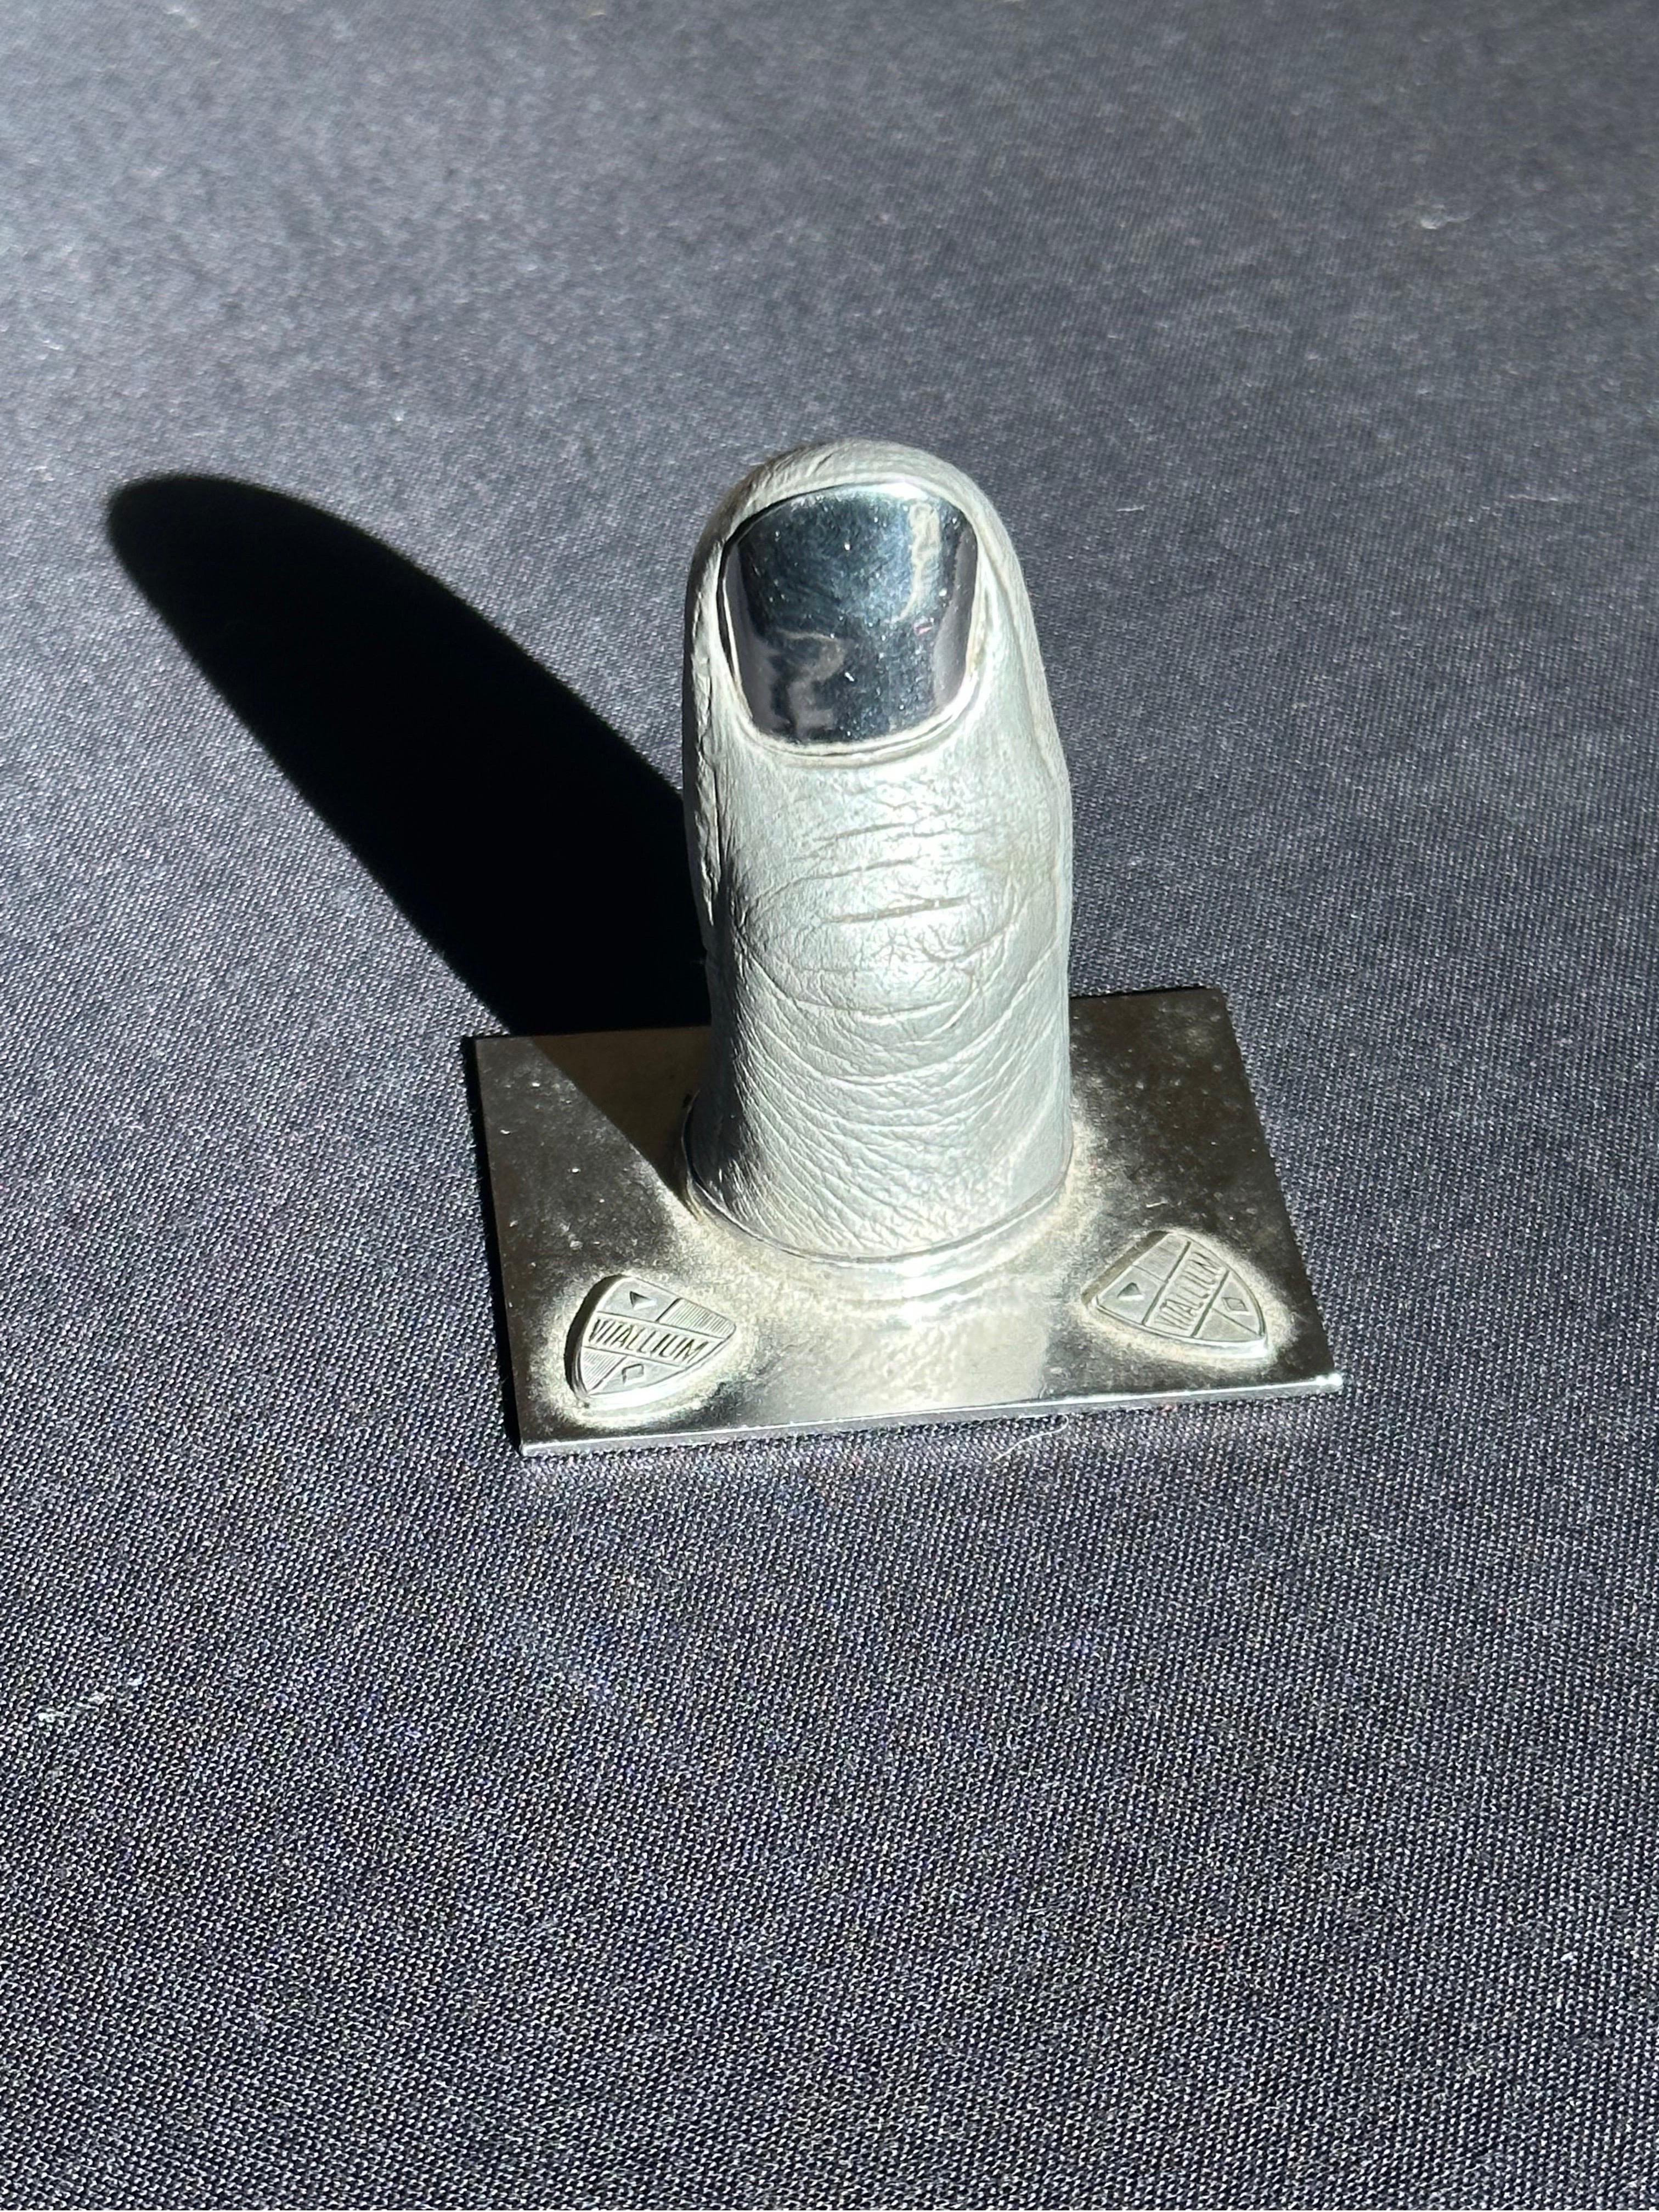 No other example of this sculpture has been found, a promotional product for the medical-grade carbon alloy used for surgical prosthetists. 

Slightly larger than life scale, clever chrome nail, and extremely detail in texture/finger print.